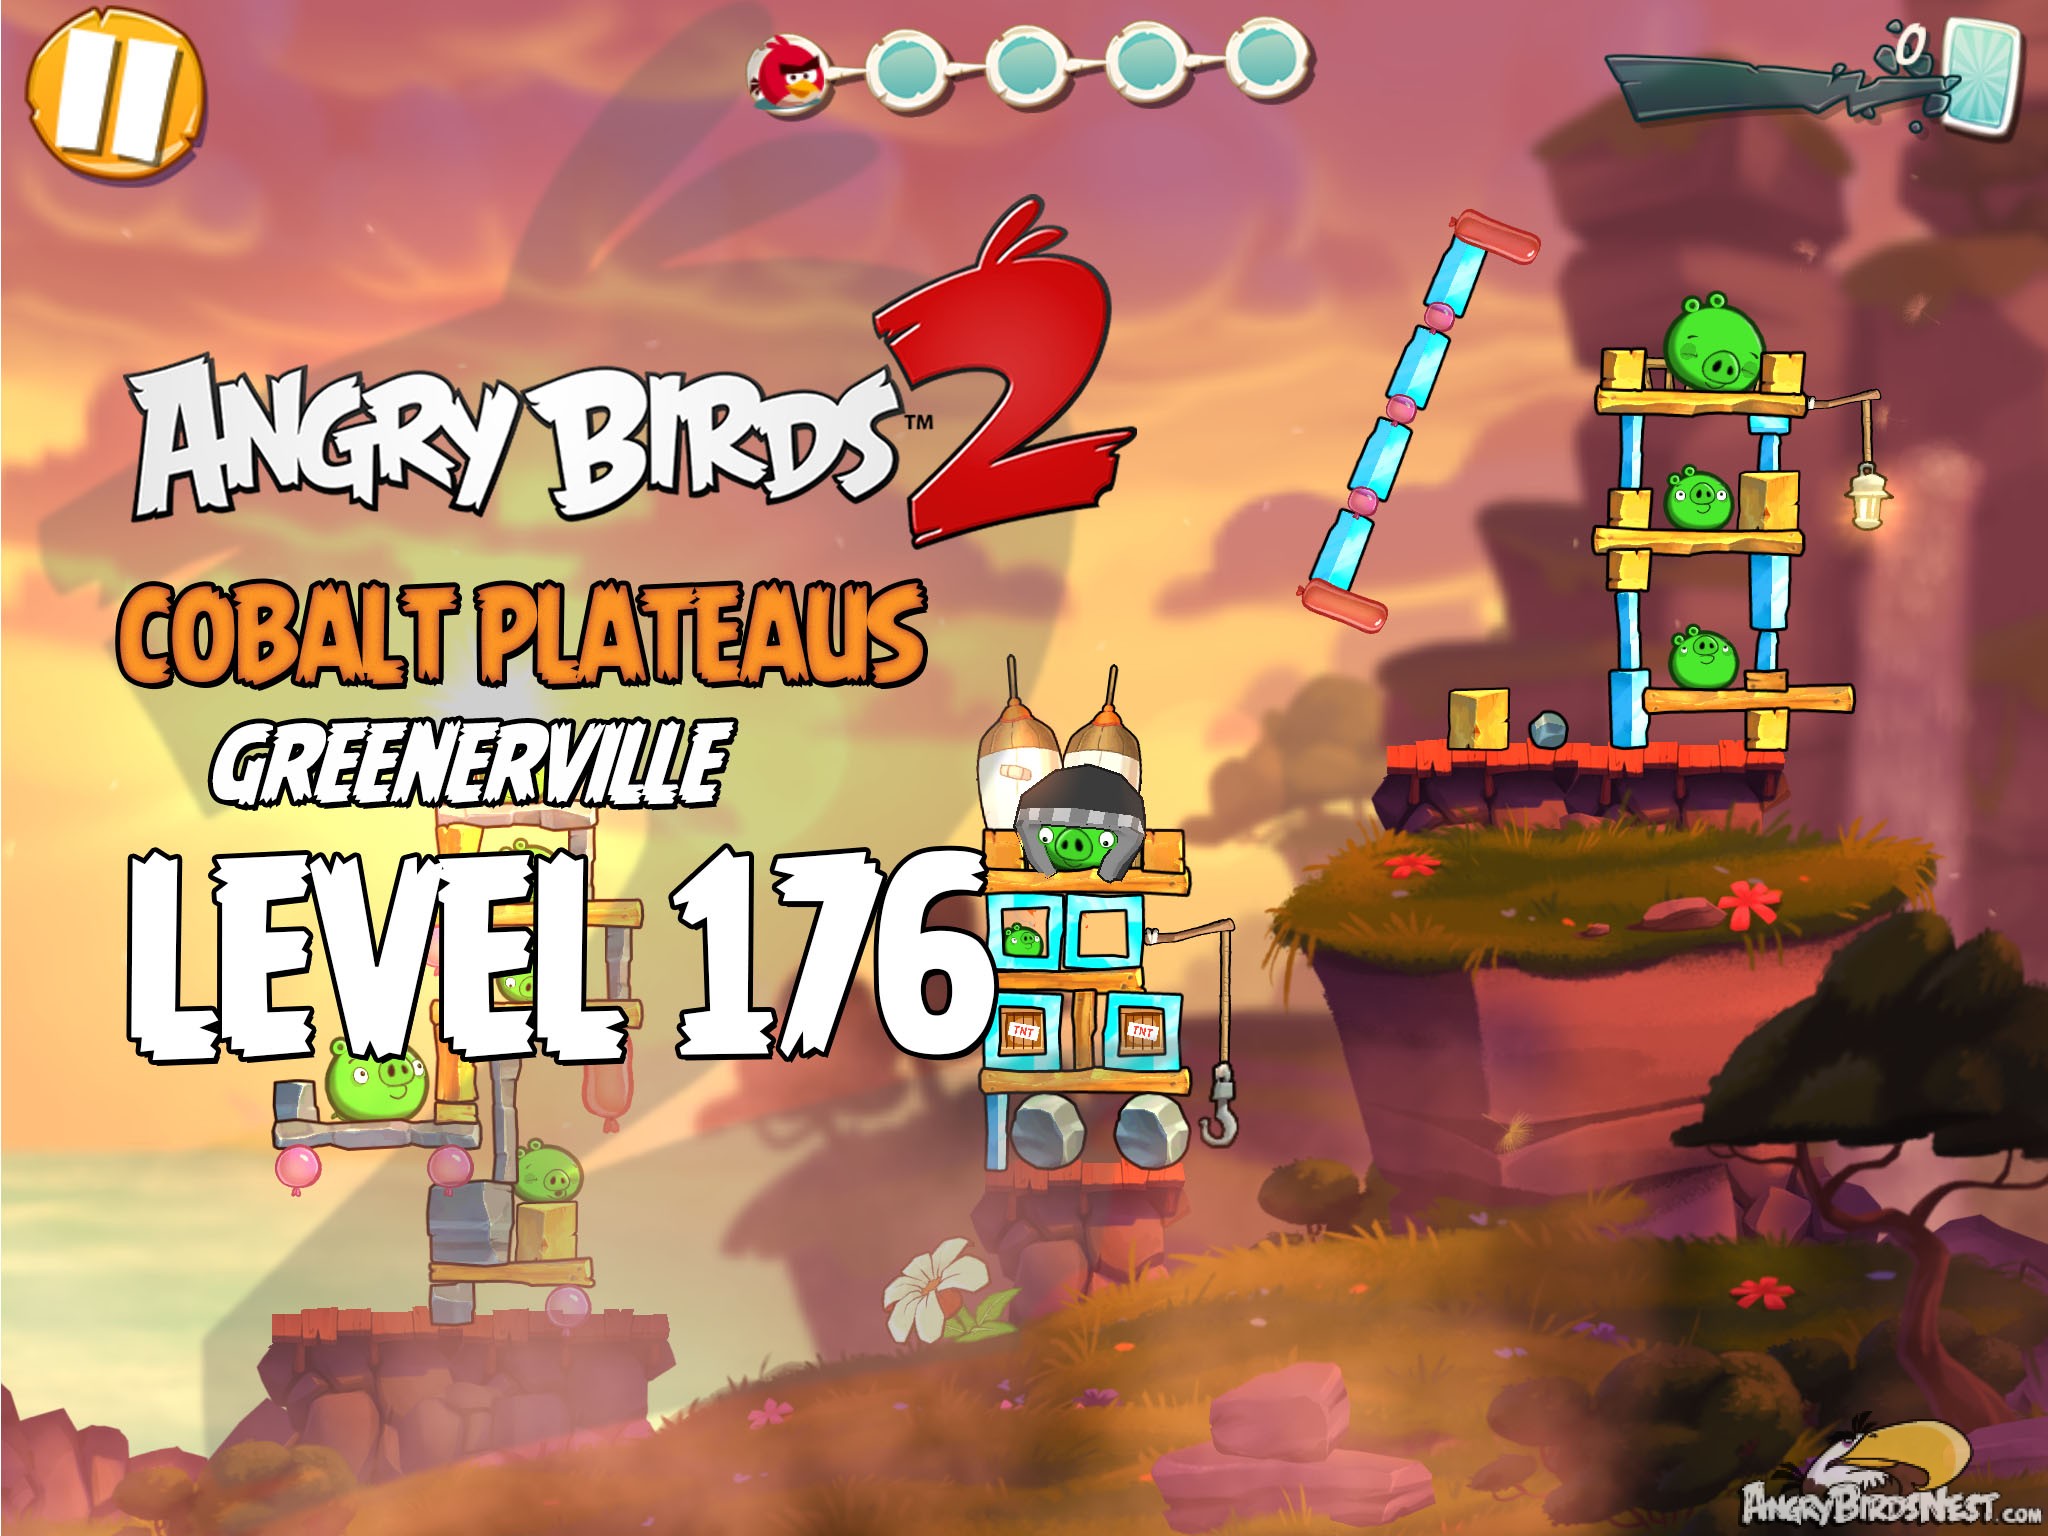 Angry Birds 2 Cobalt Plateaus Greenerville Level 176